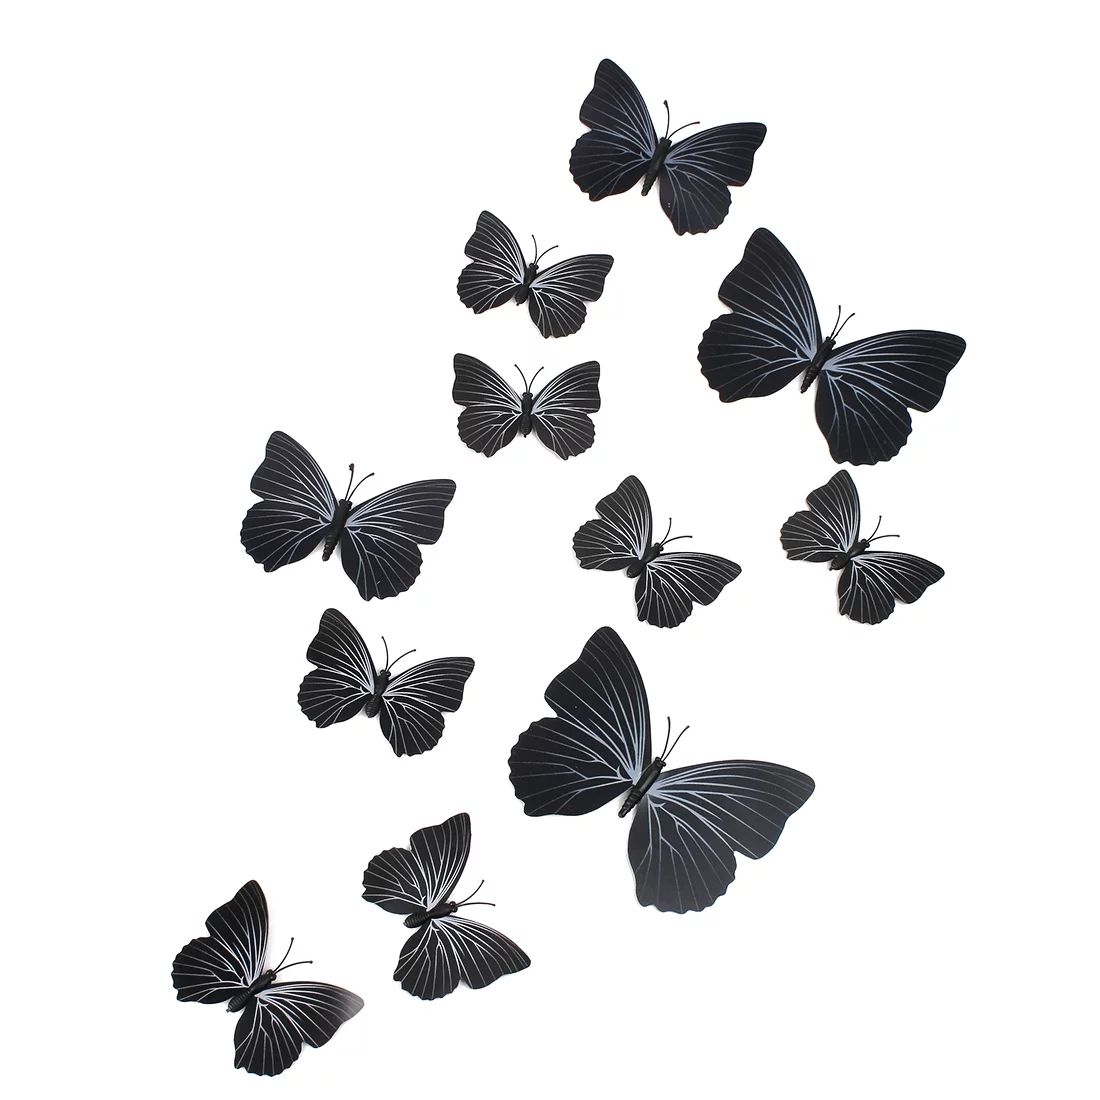 DIY 3D Black Butterfly Magnet Wall Stickers Mural Decal Room Decor Set 12 in 1 | Walmart (US)